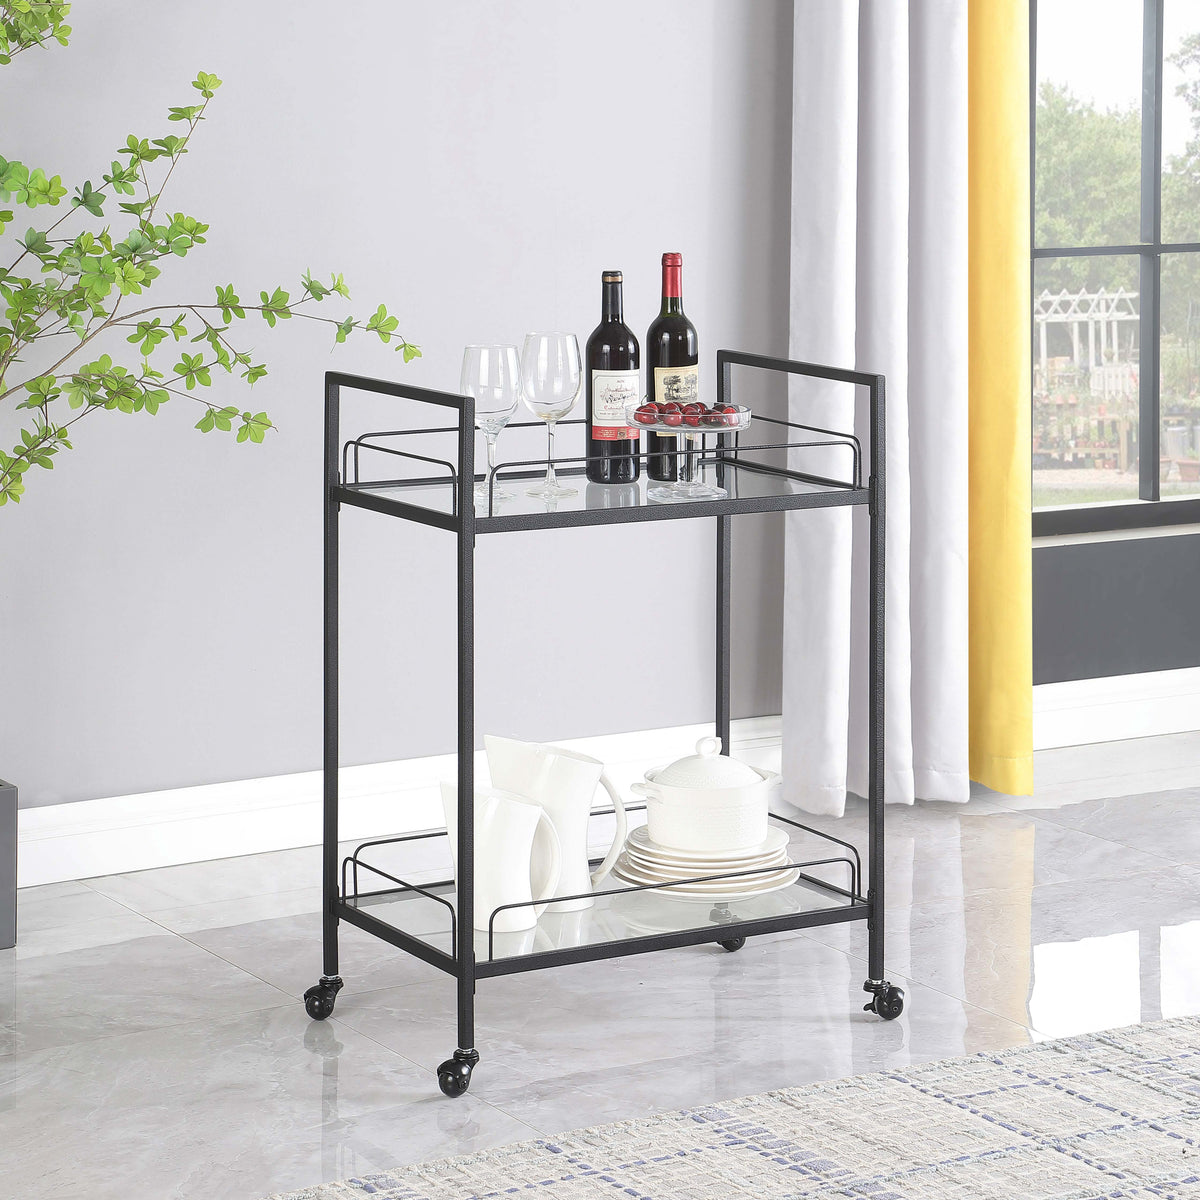 Curltis Serving Cart with Glass Shelves Clear and Black  Half Price Furniture